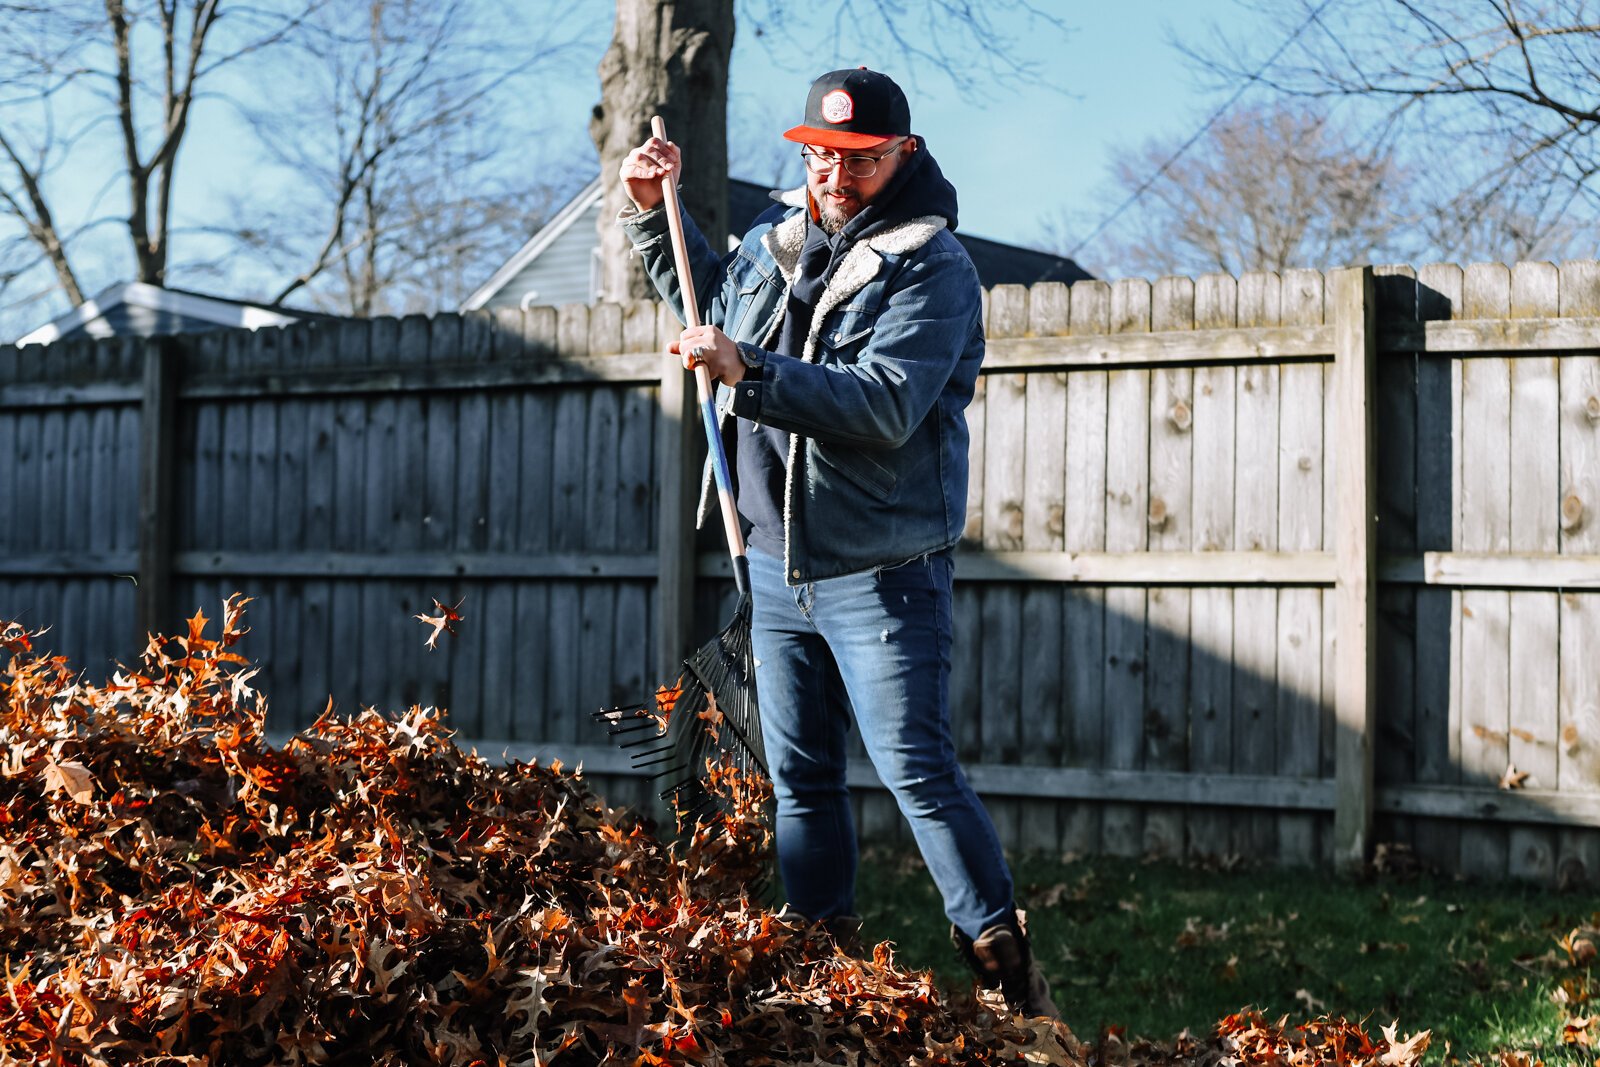 Eric Wood, Executive Director of NeighborLink, helps clear leaves while volunteering at a home in Fort Wayne.